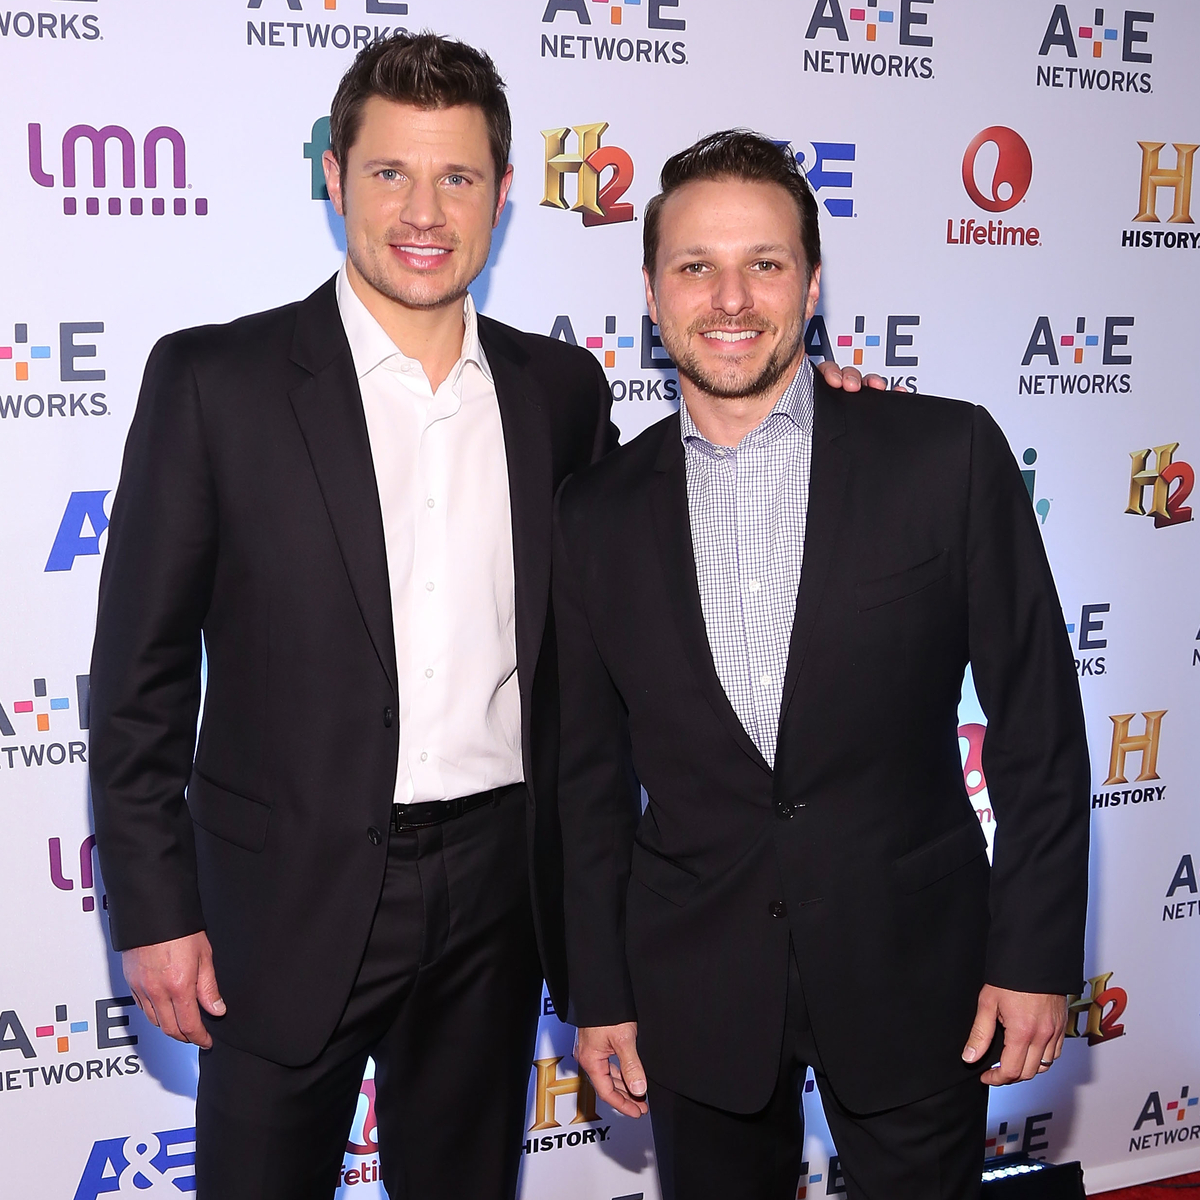 Nick Lachey reveals how couples therapy helps his relationship